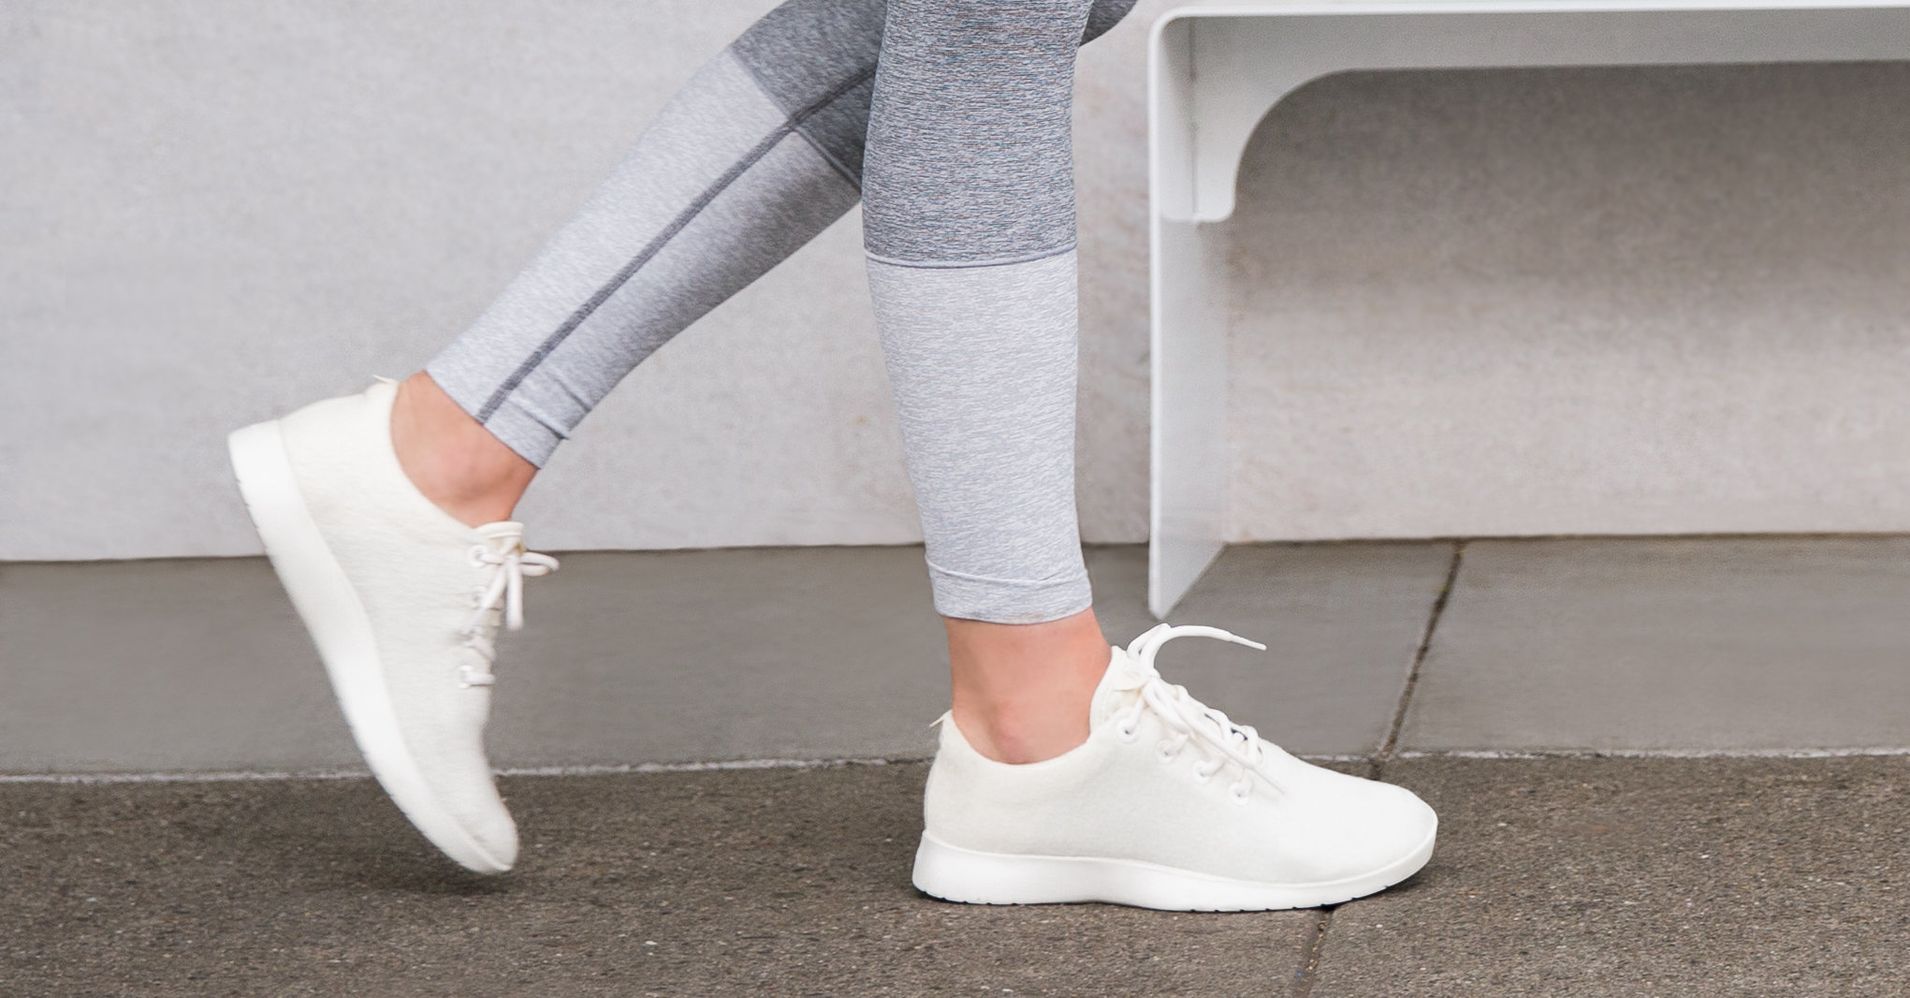 Allbirds Sneakers Is A Likely Bet To Replace Your Converse | HuffPost